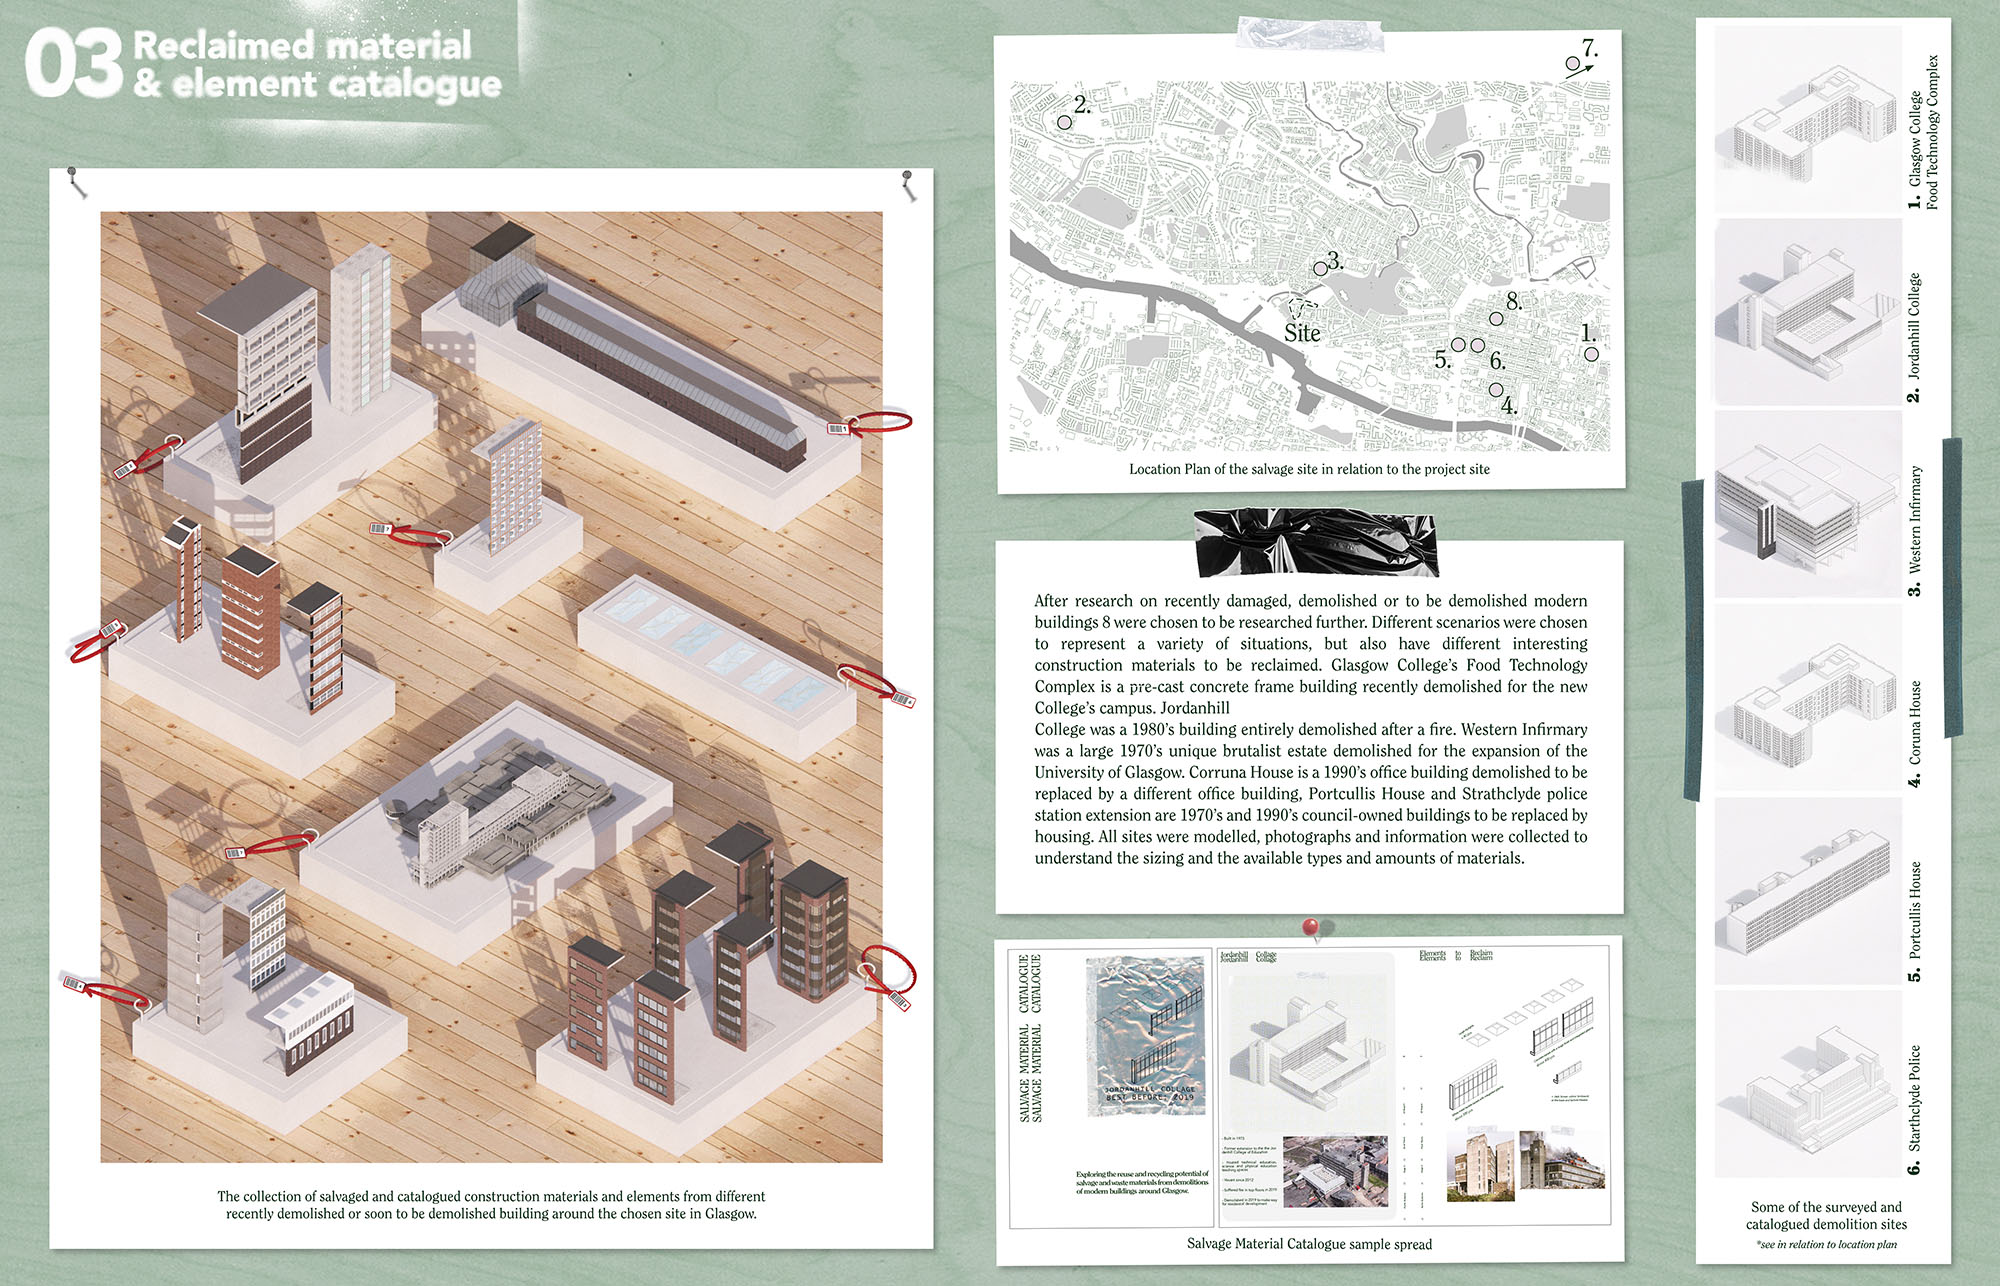 Page 3 of Karlis Kukainis winning entry to the A&DS and RIAS Scottish Student Award. The board includes architectural concepts and a map showcasing the location plan.